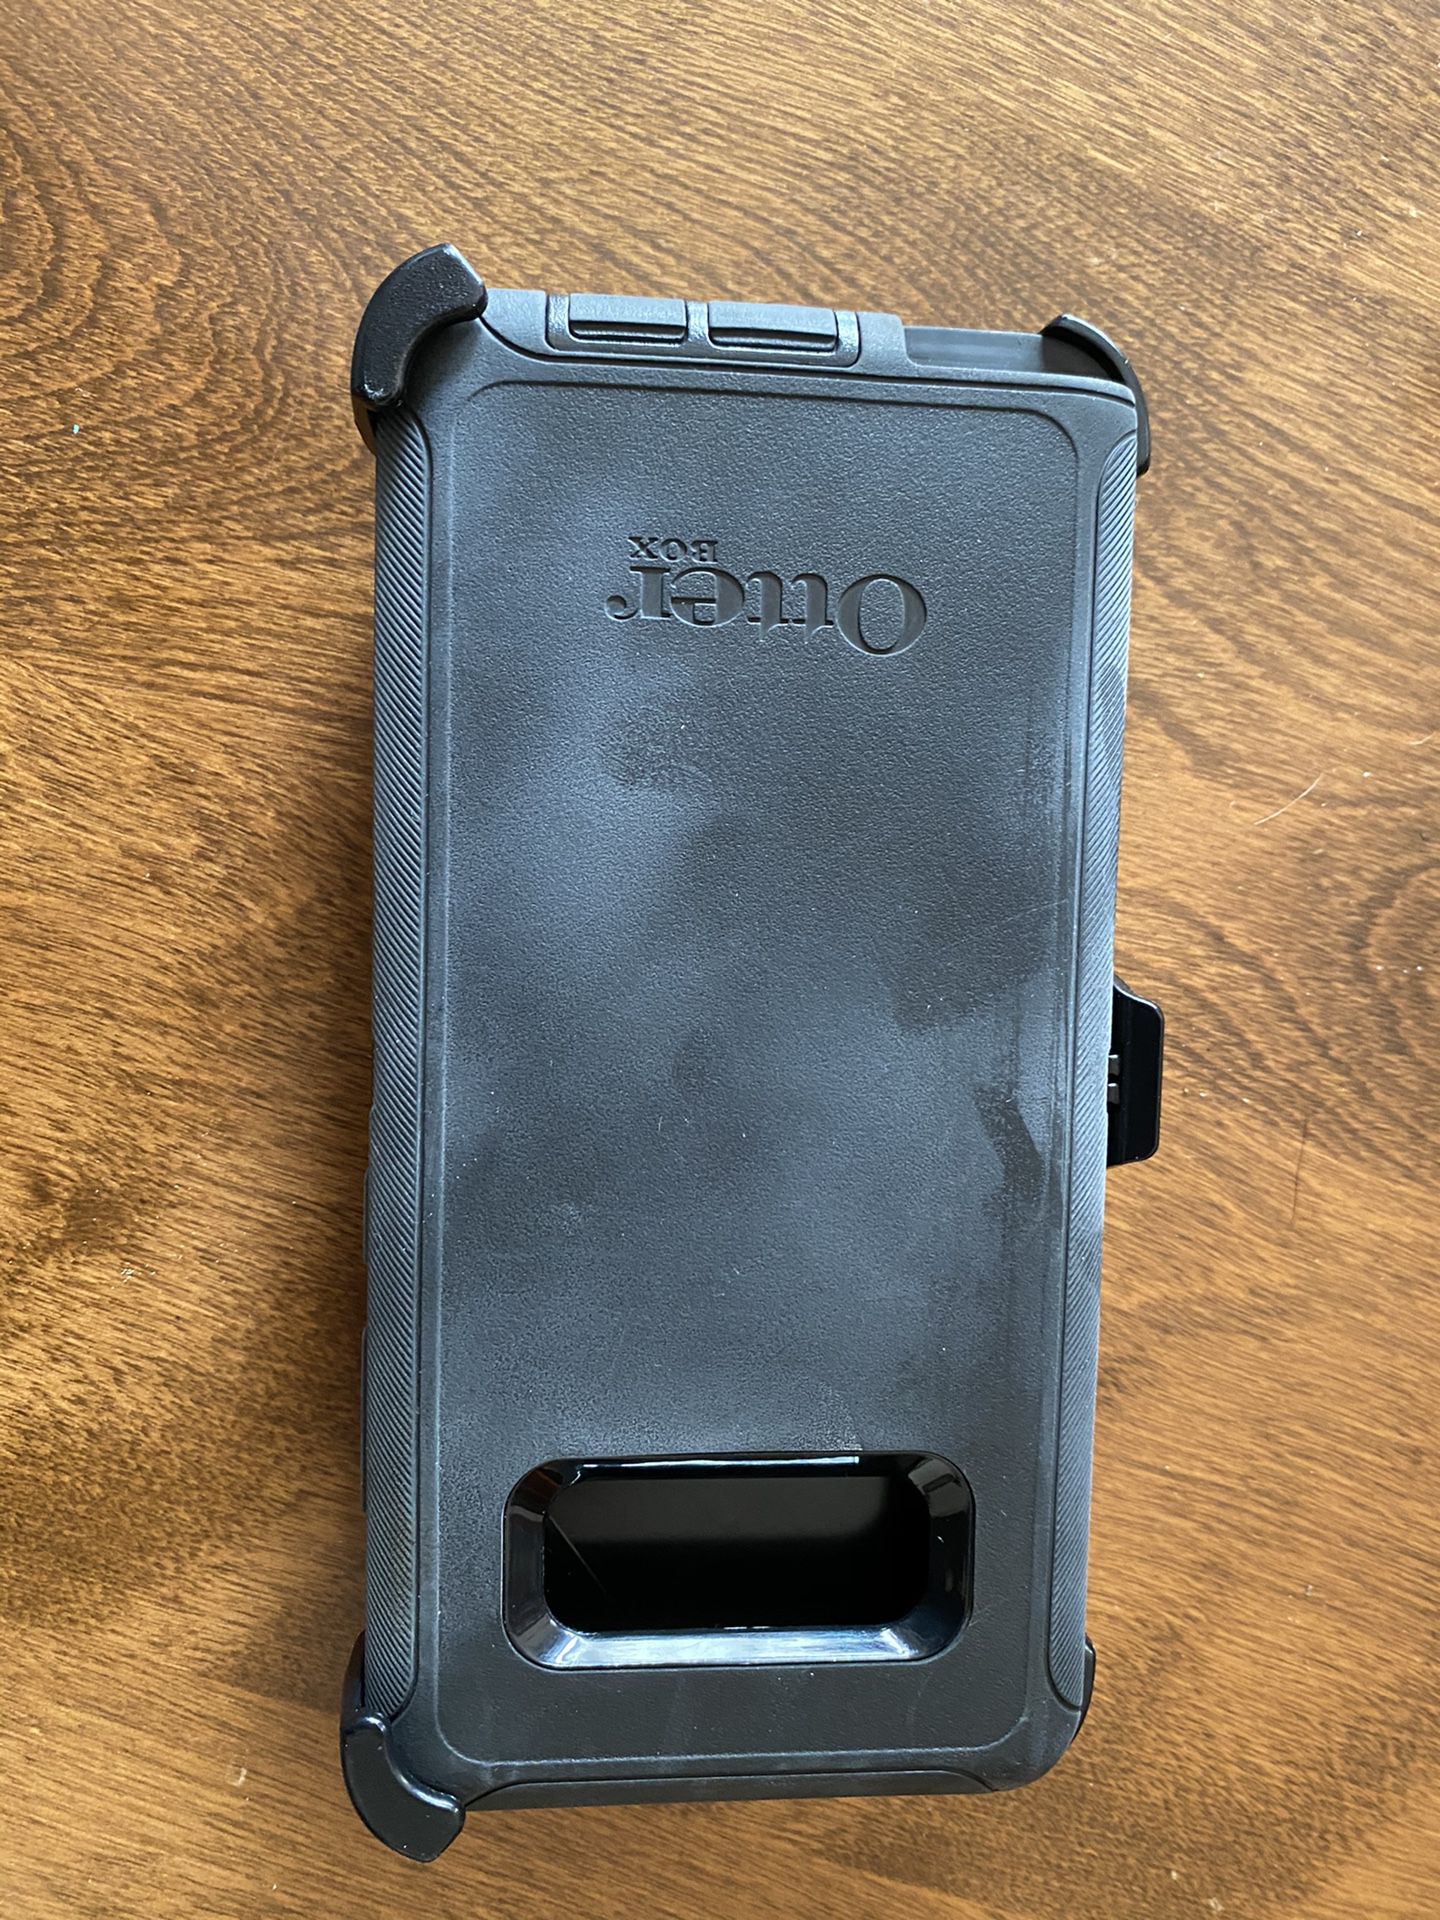 Otter box defender for Samsung Galaxy Note 8